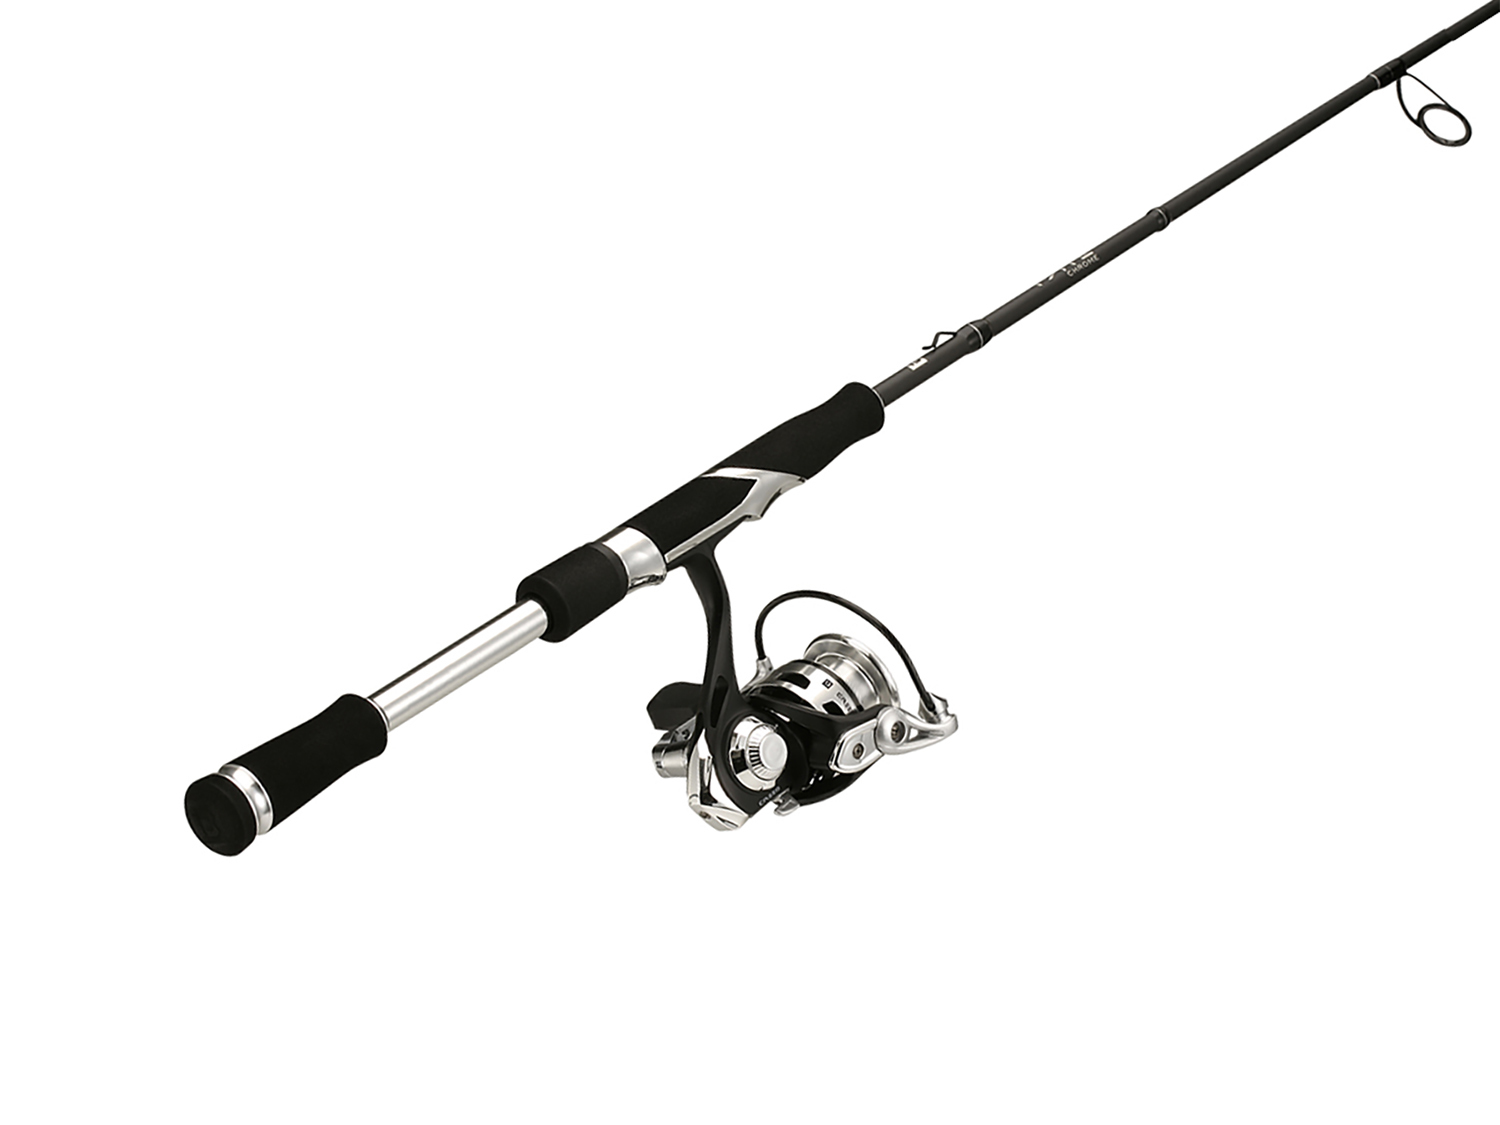 13 Fishing Fate FT Casting Combo Rod